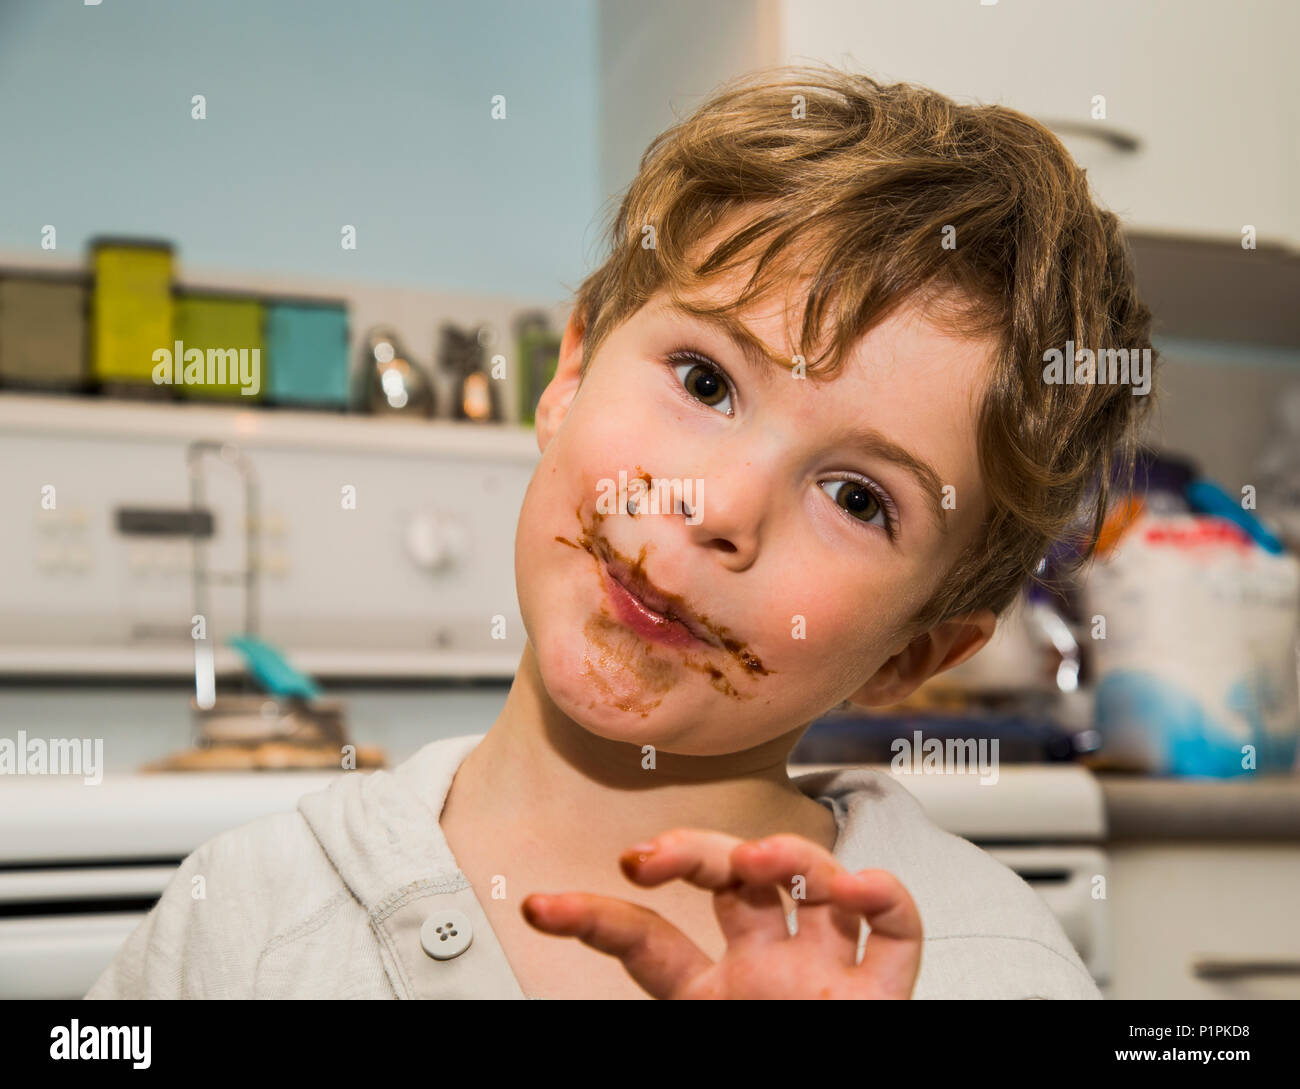 A grinning young boy icking fingers and getting messy after making fudge; Langley, British Columbia, Canada Stock Photo